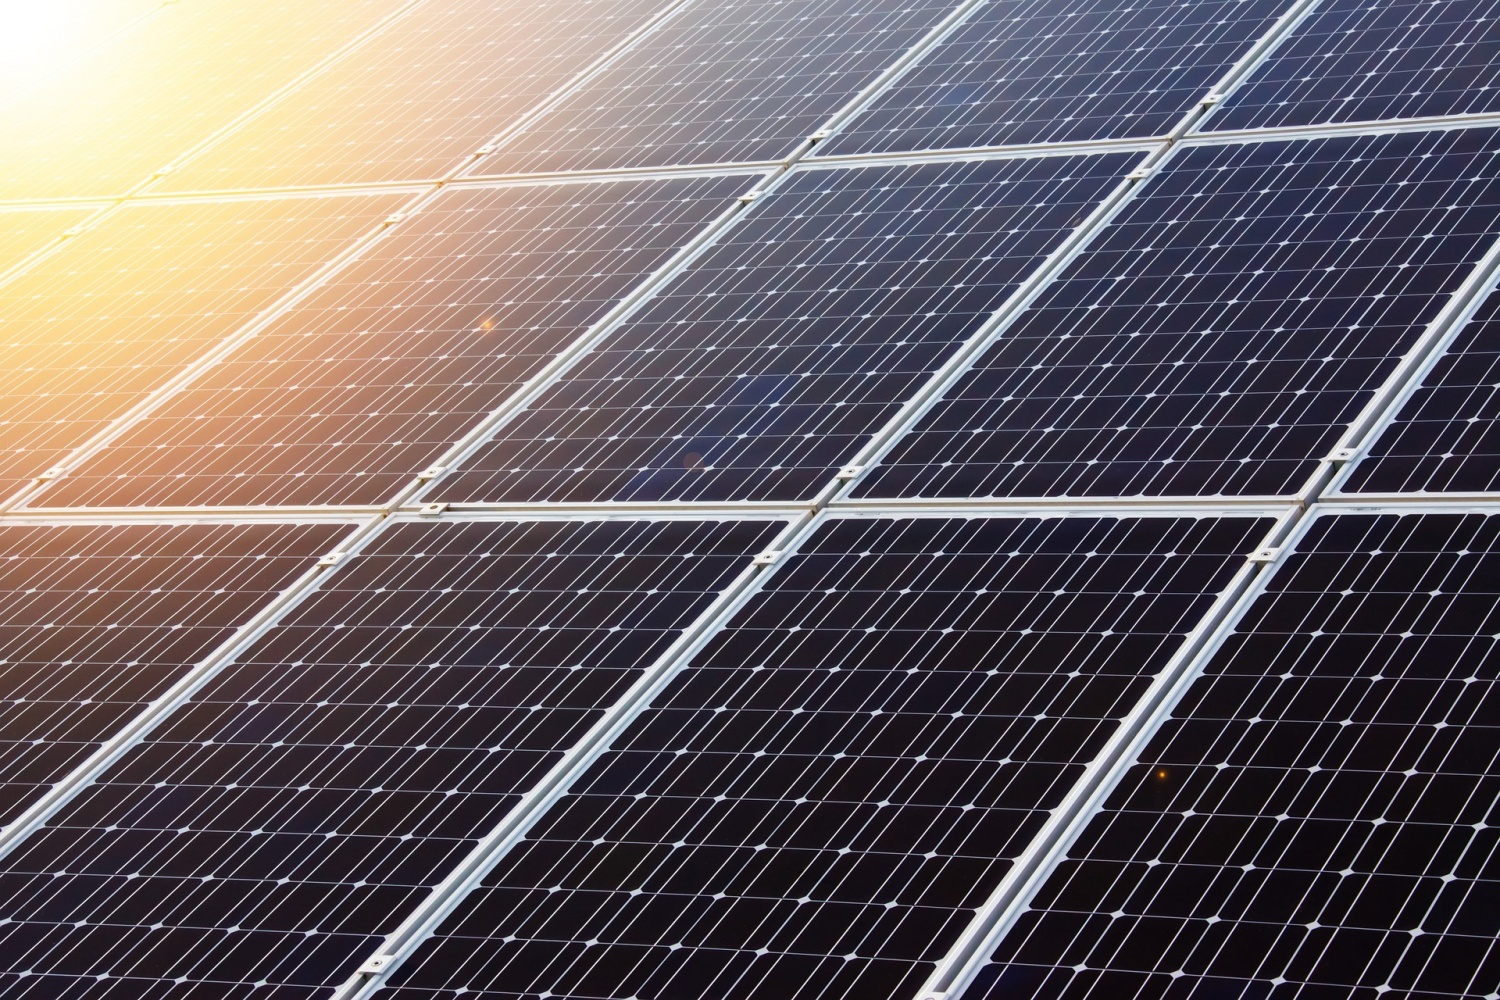 Scientists Connect Two Solar Technologies to Increase Efficiency